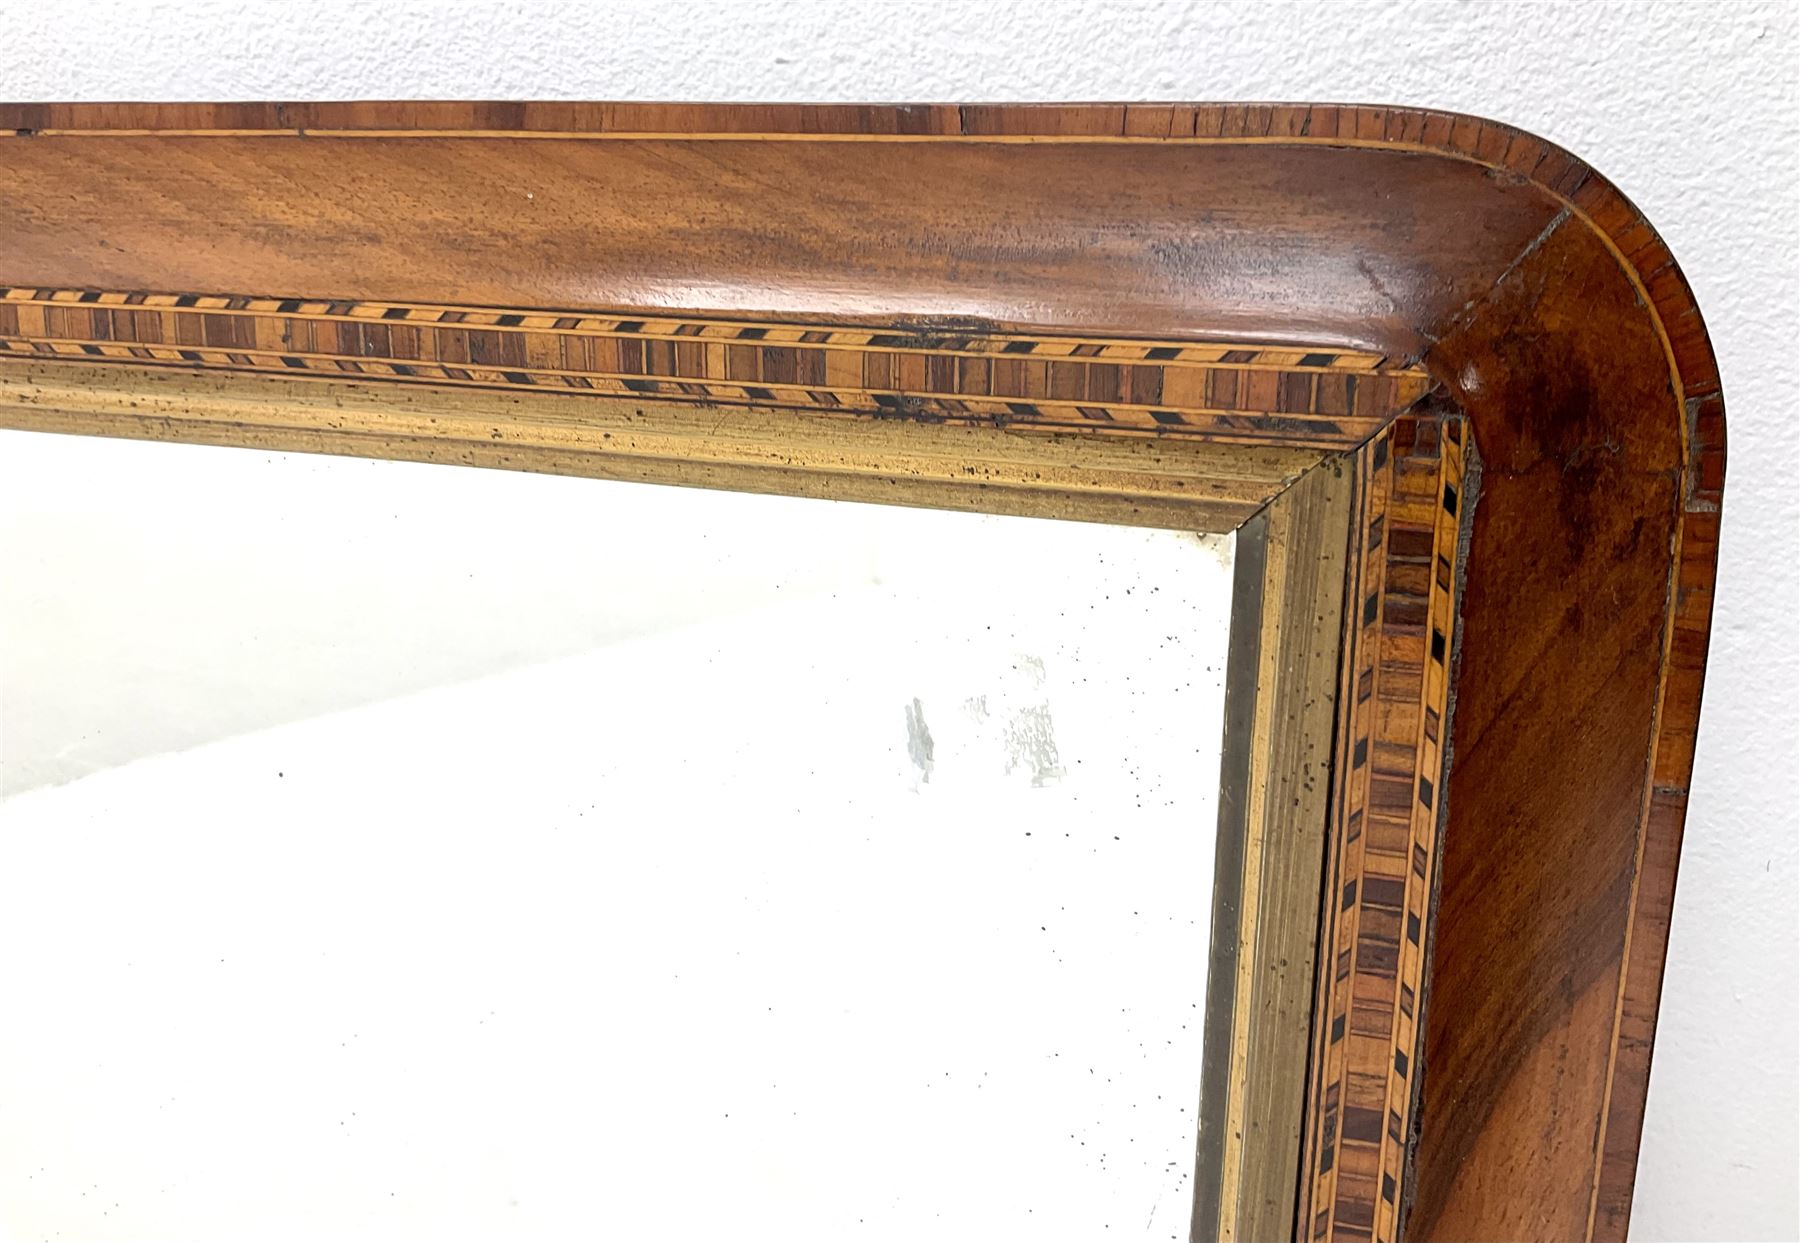 19th century cross banded and inlaid Tunbridgeware overmantle mirror - Image 2 of 2